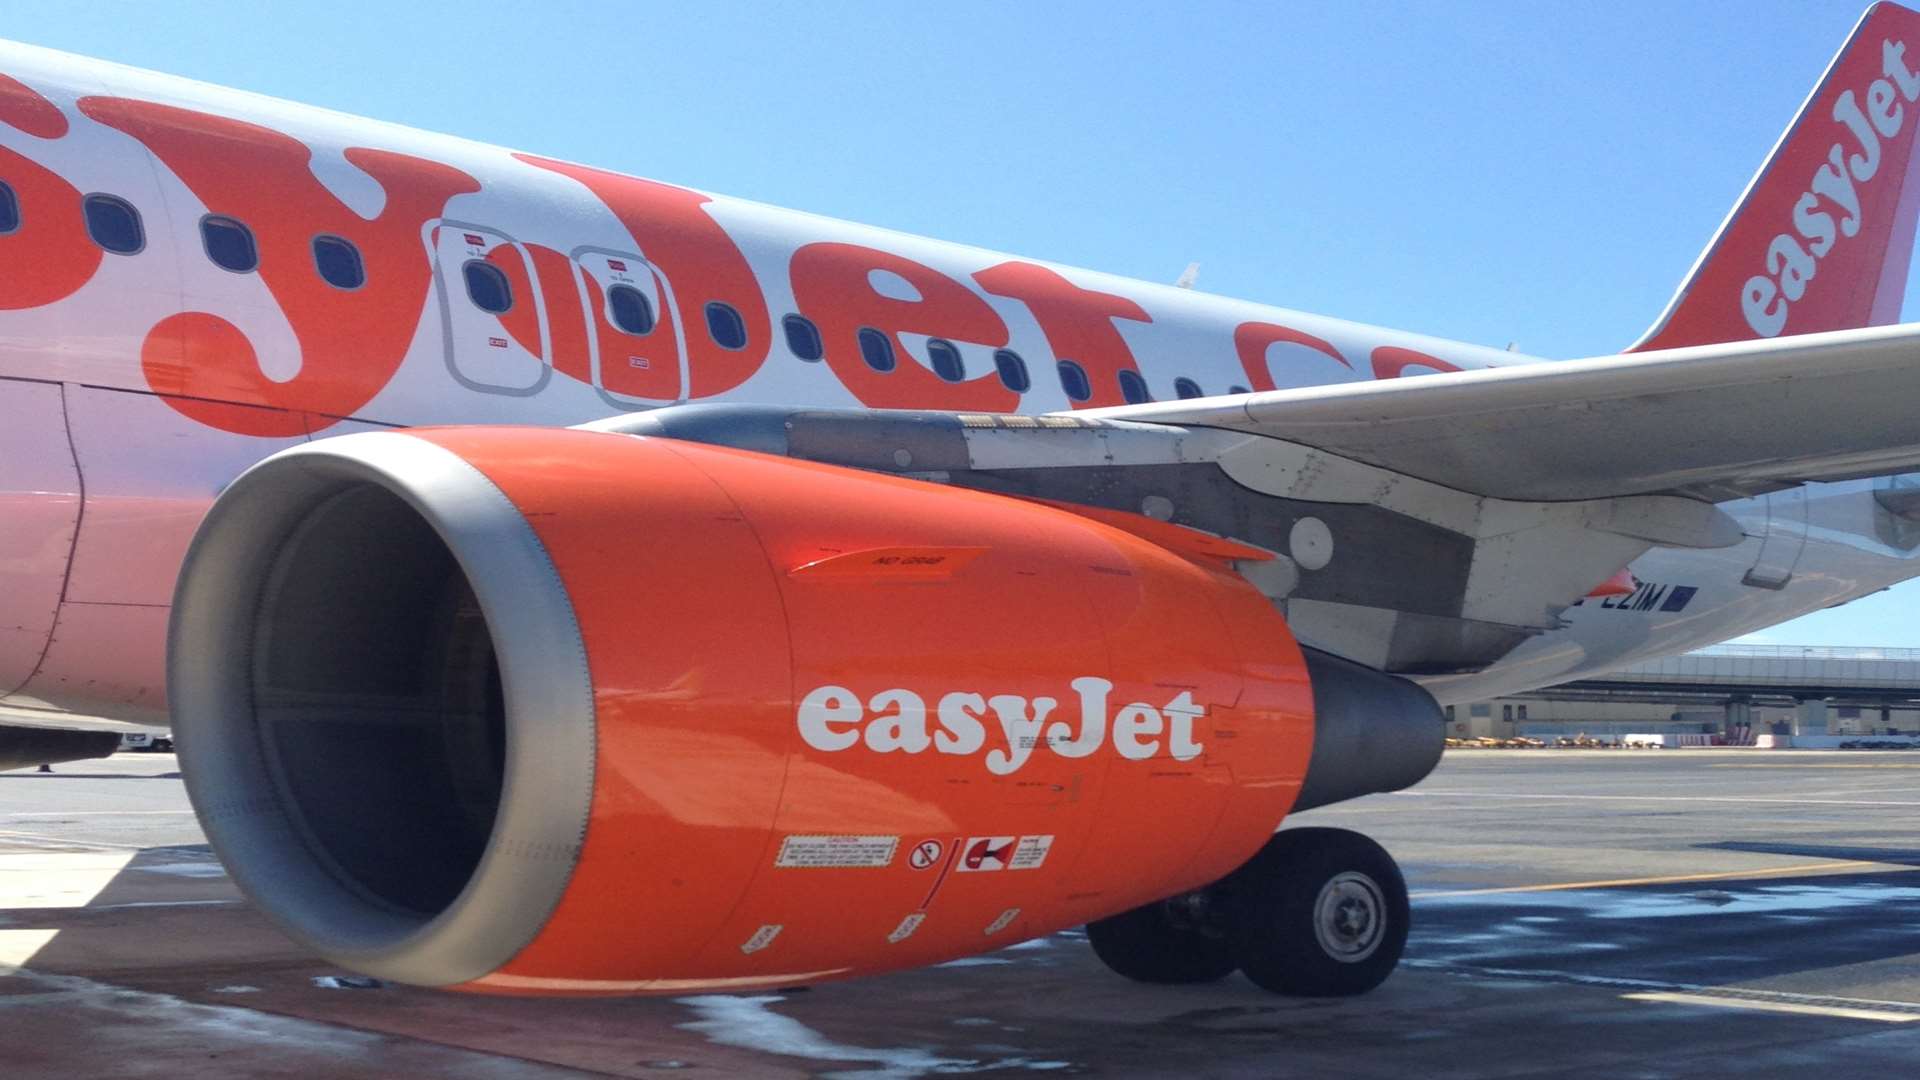 easyJet has pledged to reduce aircraft noise